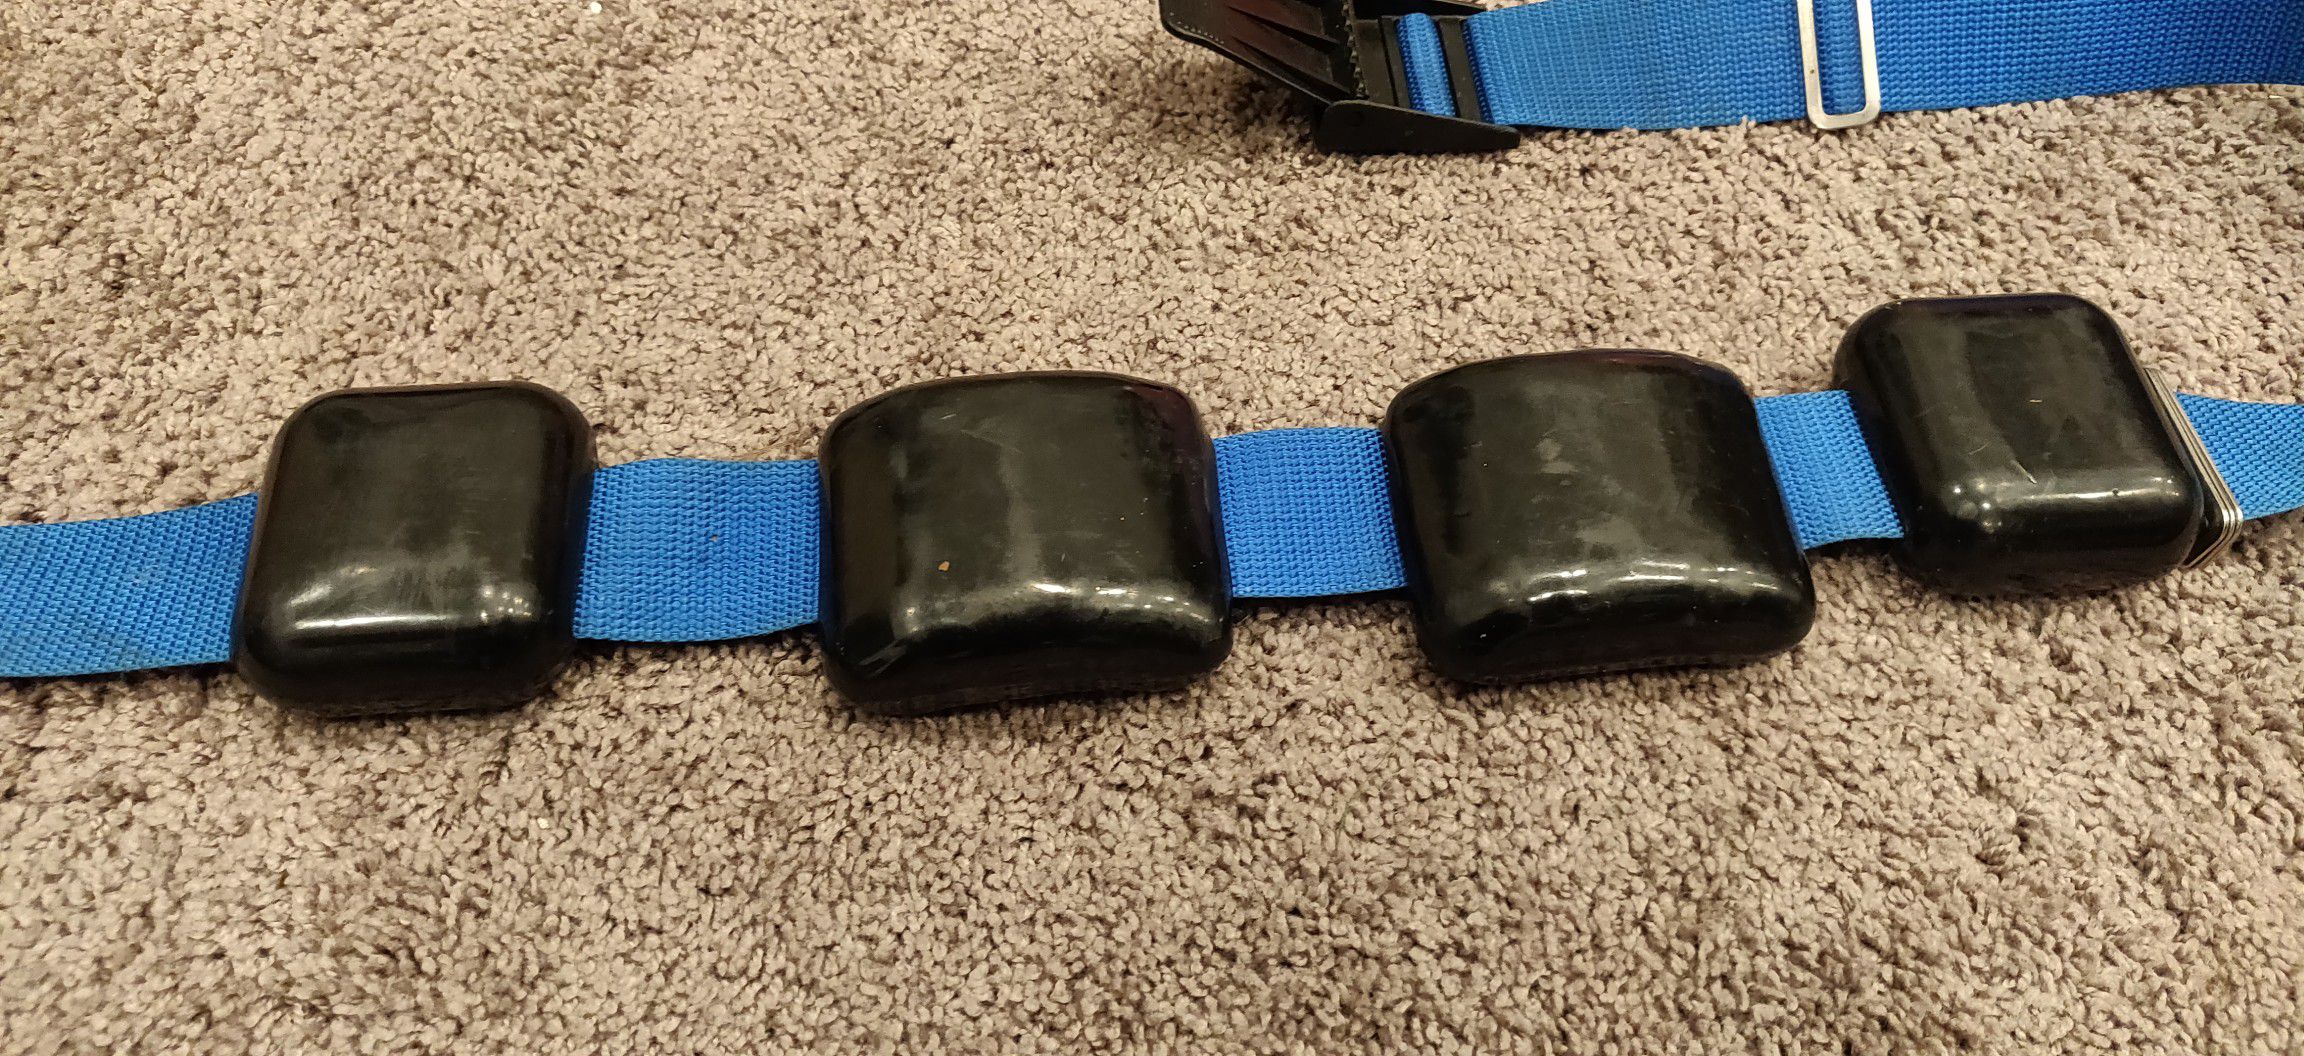 Scuba Weight Belt and Lead Weights 12 lbs